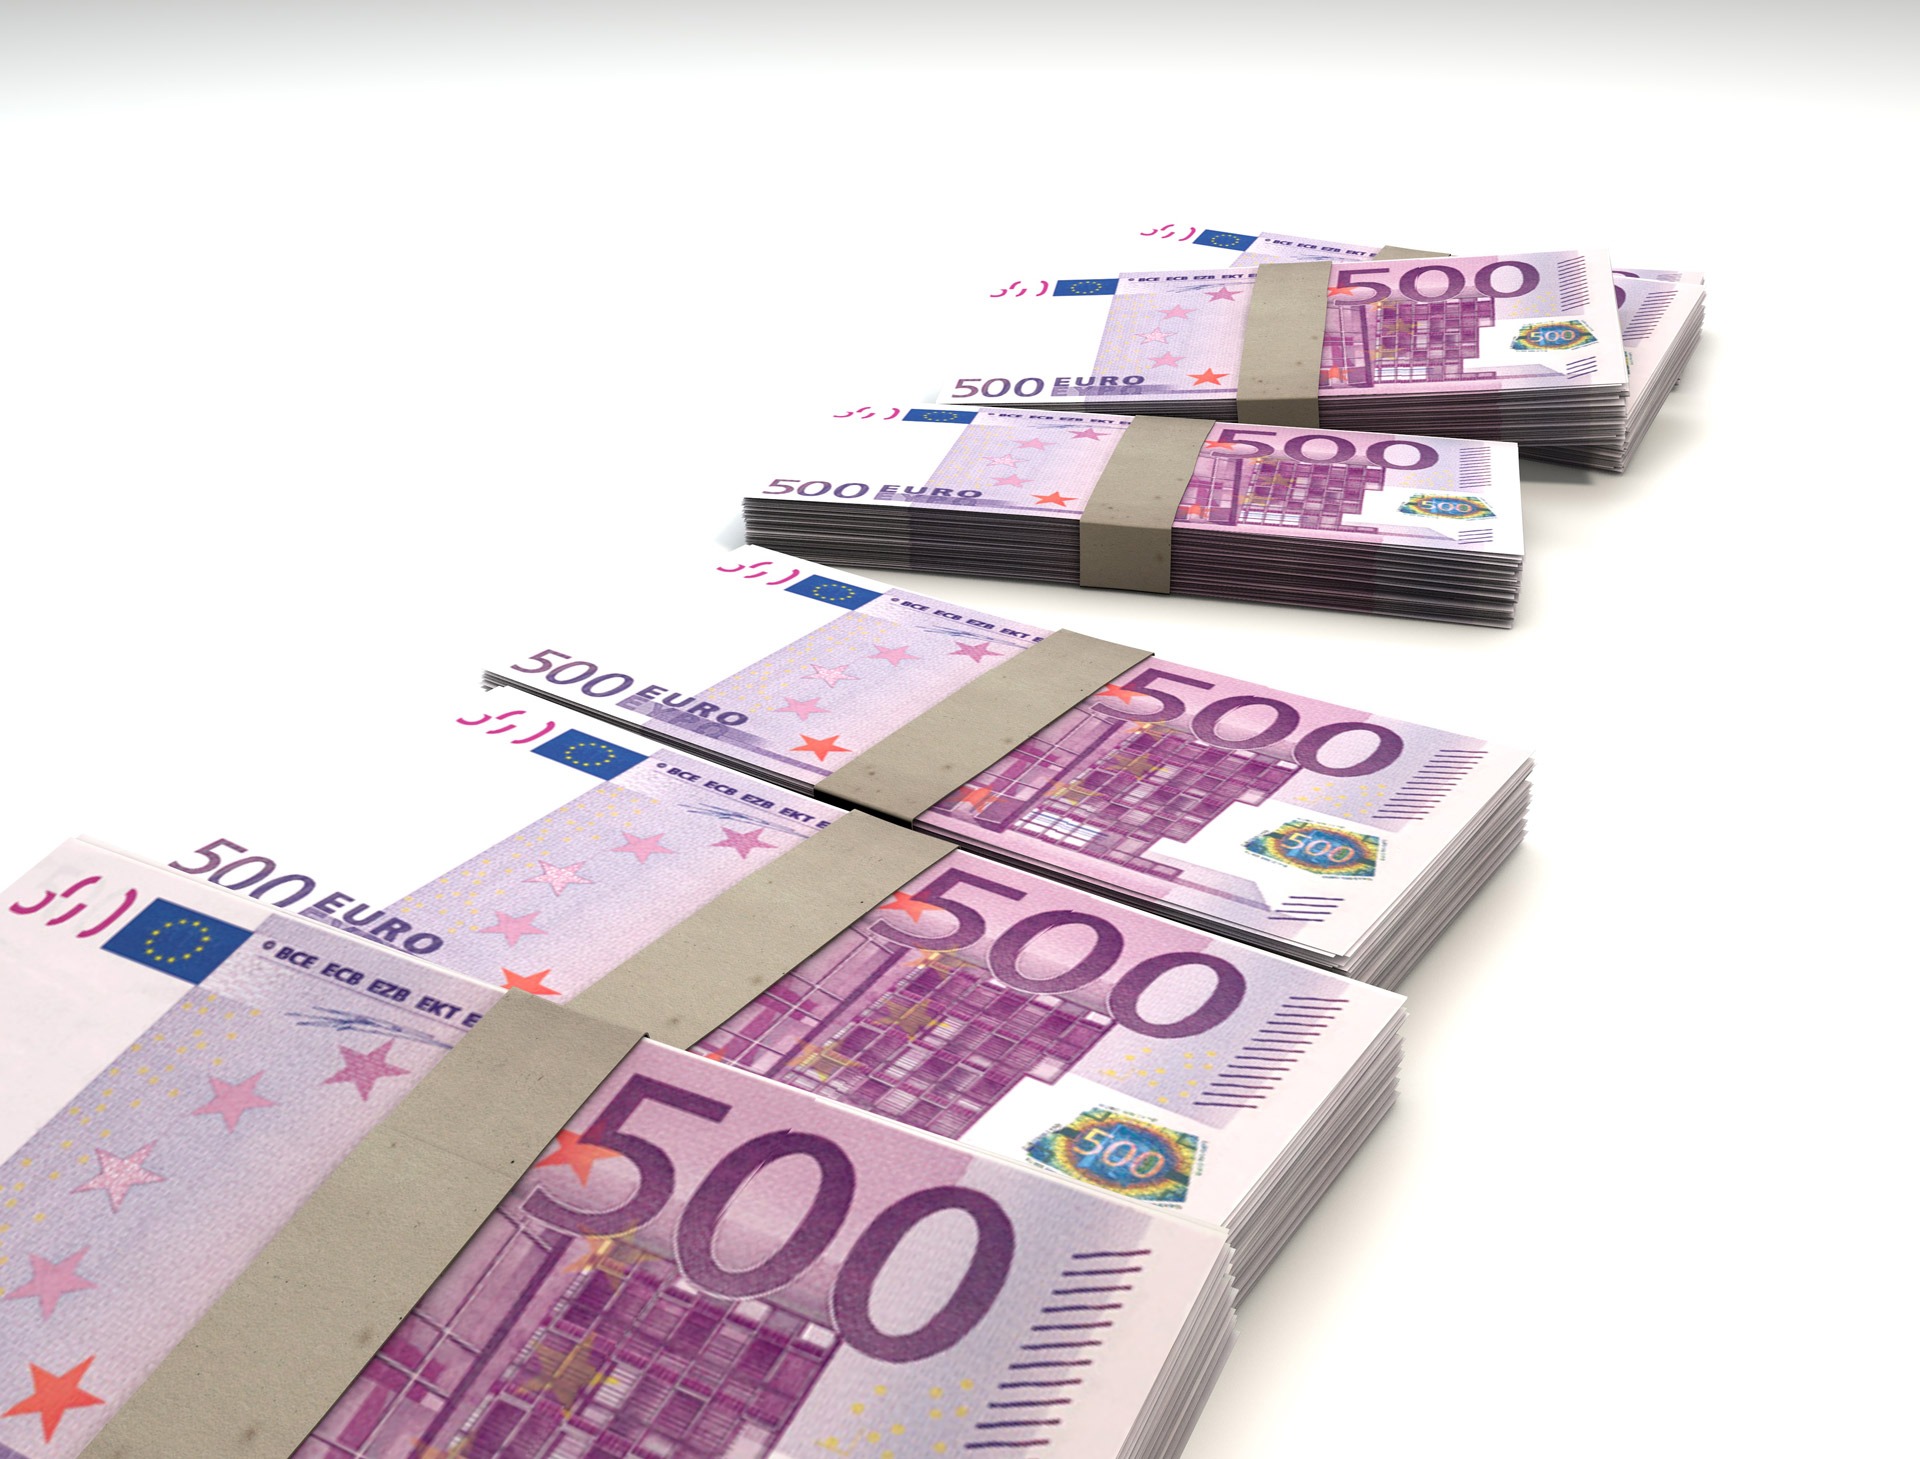 Wads of money for 500 euros